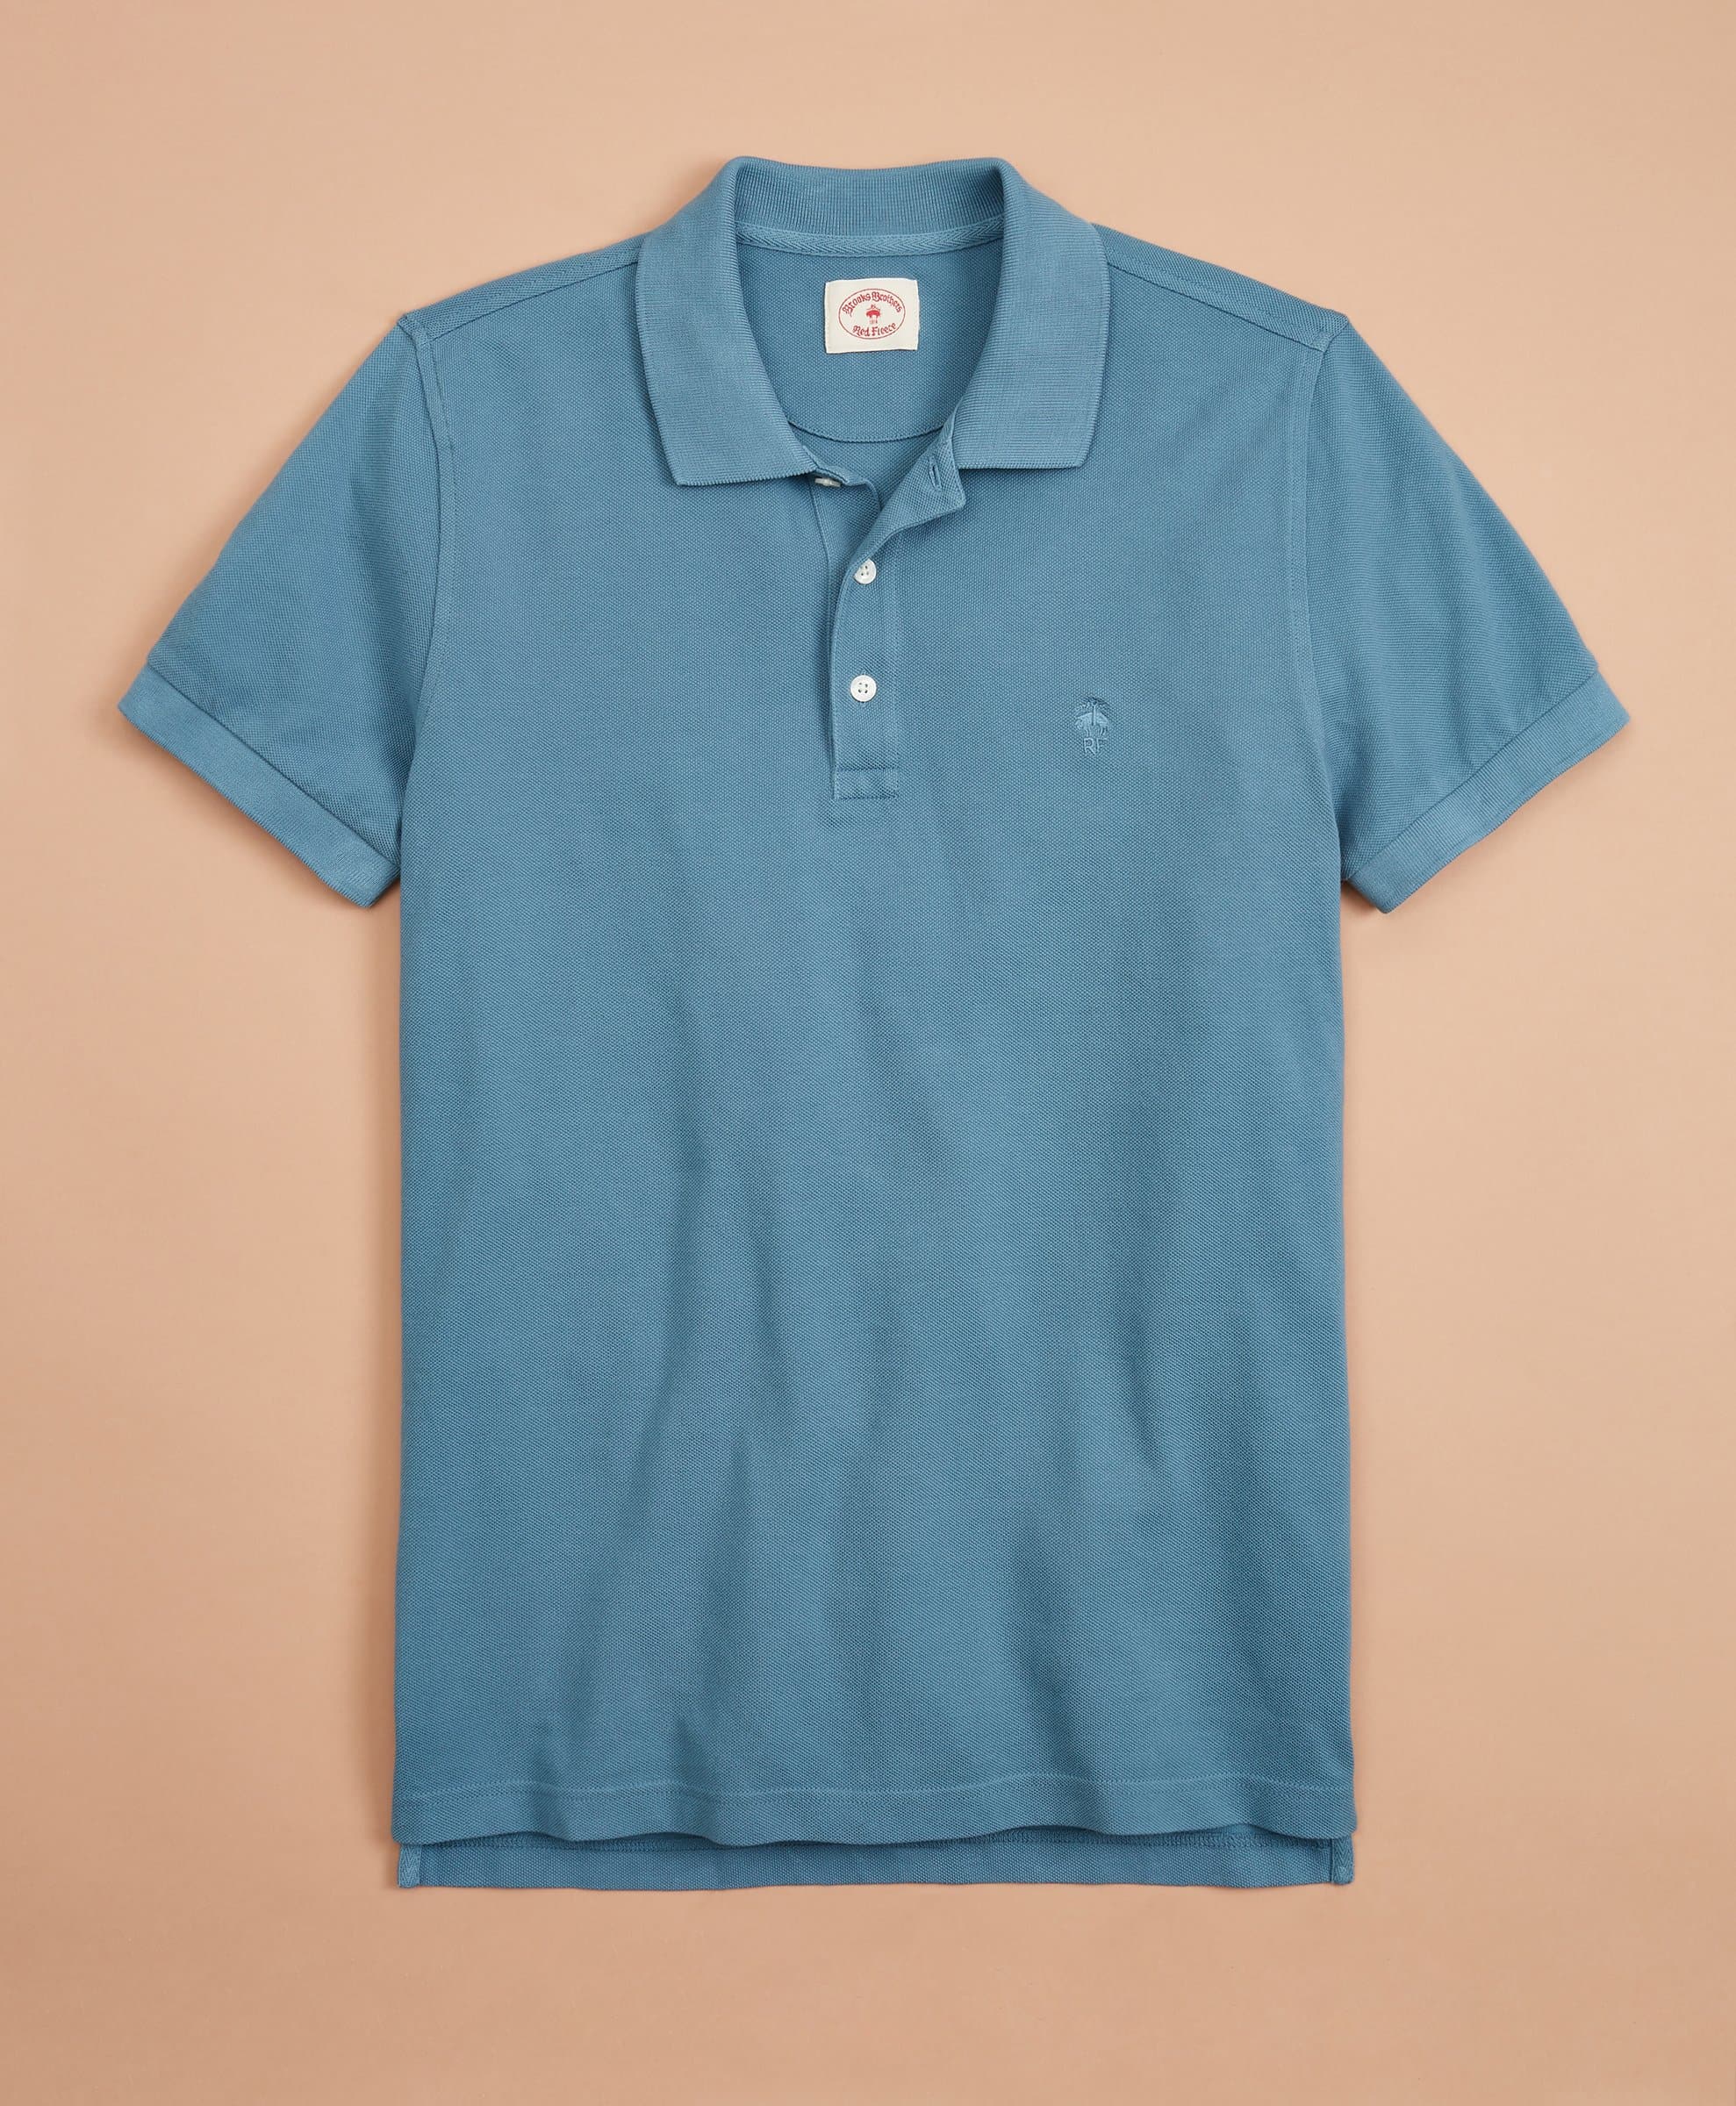 Brooks-Brothers-Garment-Dyed-Cotton-Pique-Polo-Shirt-Provincial-Blue-000100152921-040